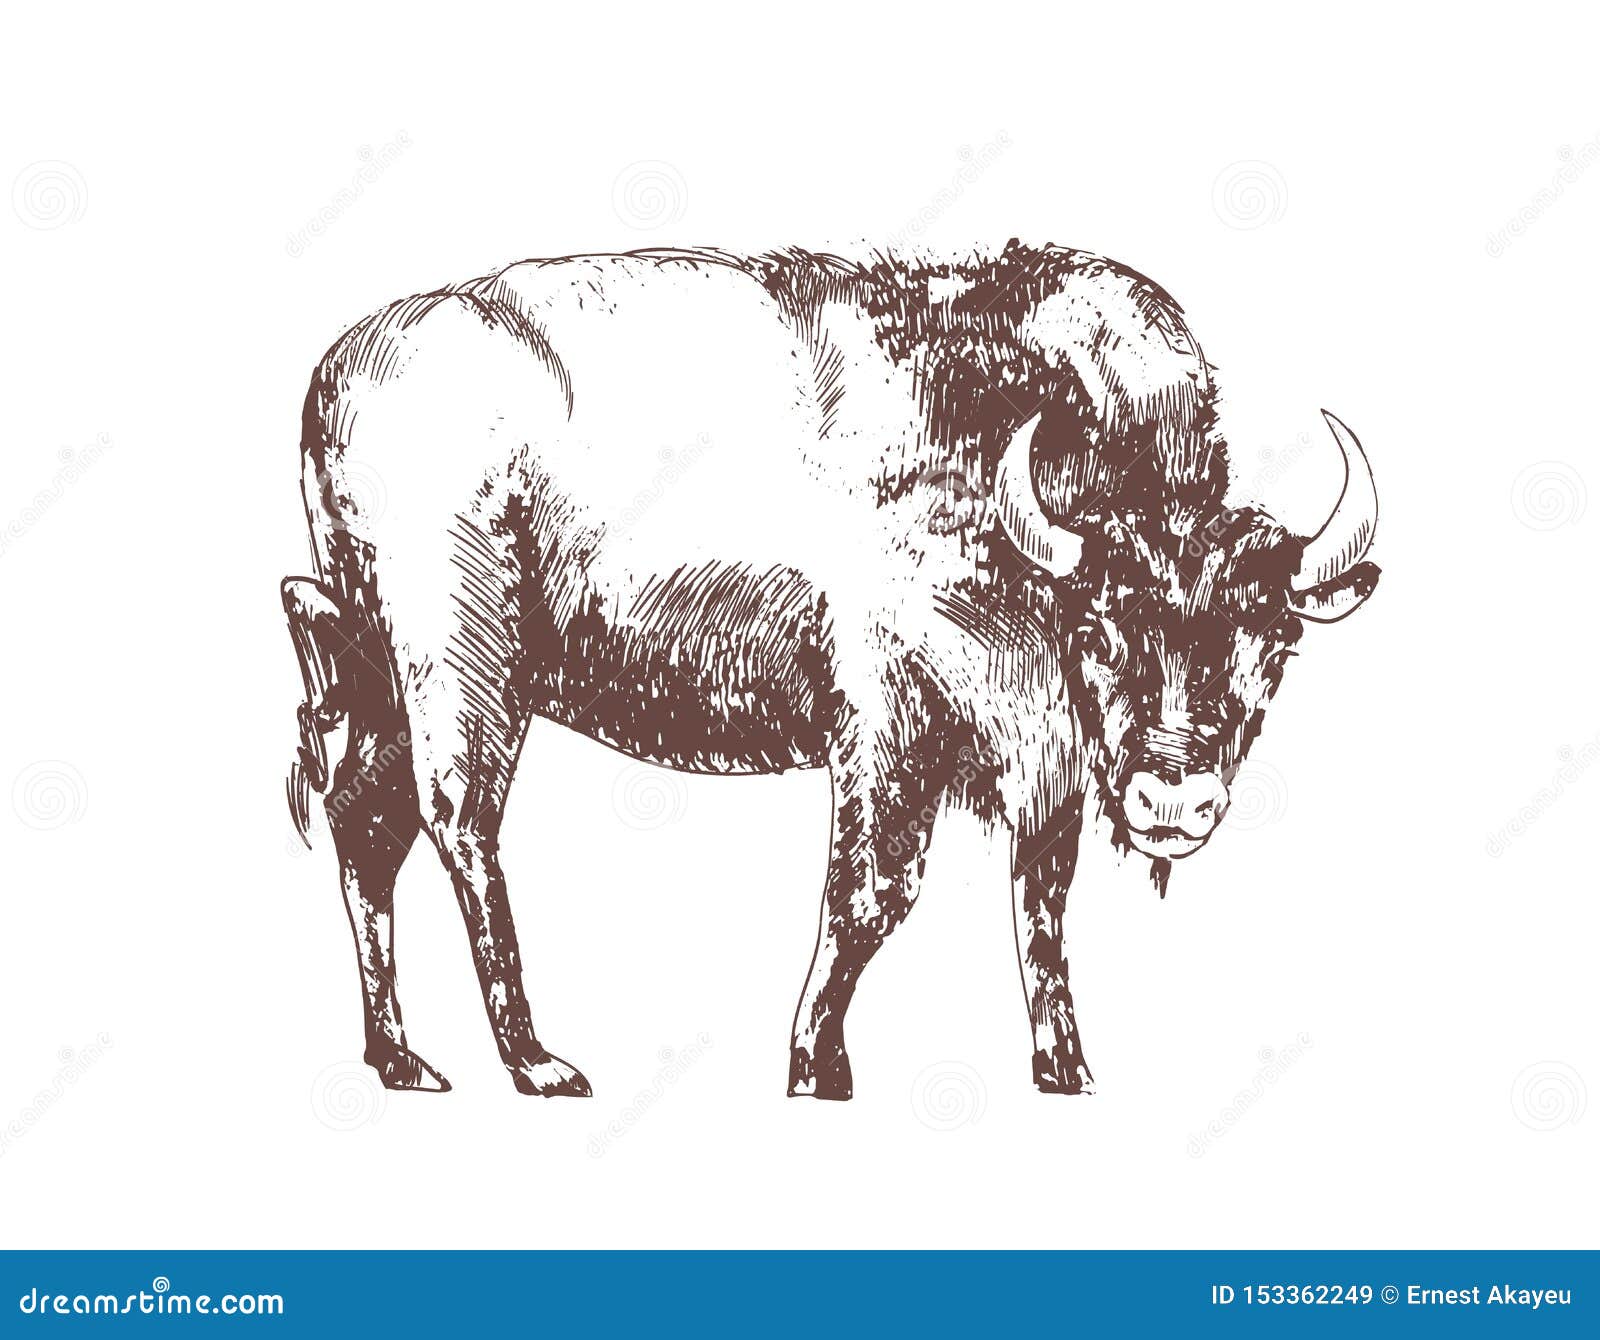 european bison hand drawn with contour lines on white background. monochrome sketch drawing of bovine herbivorous animal